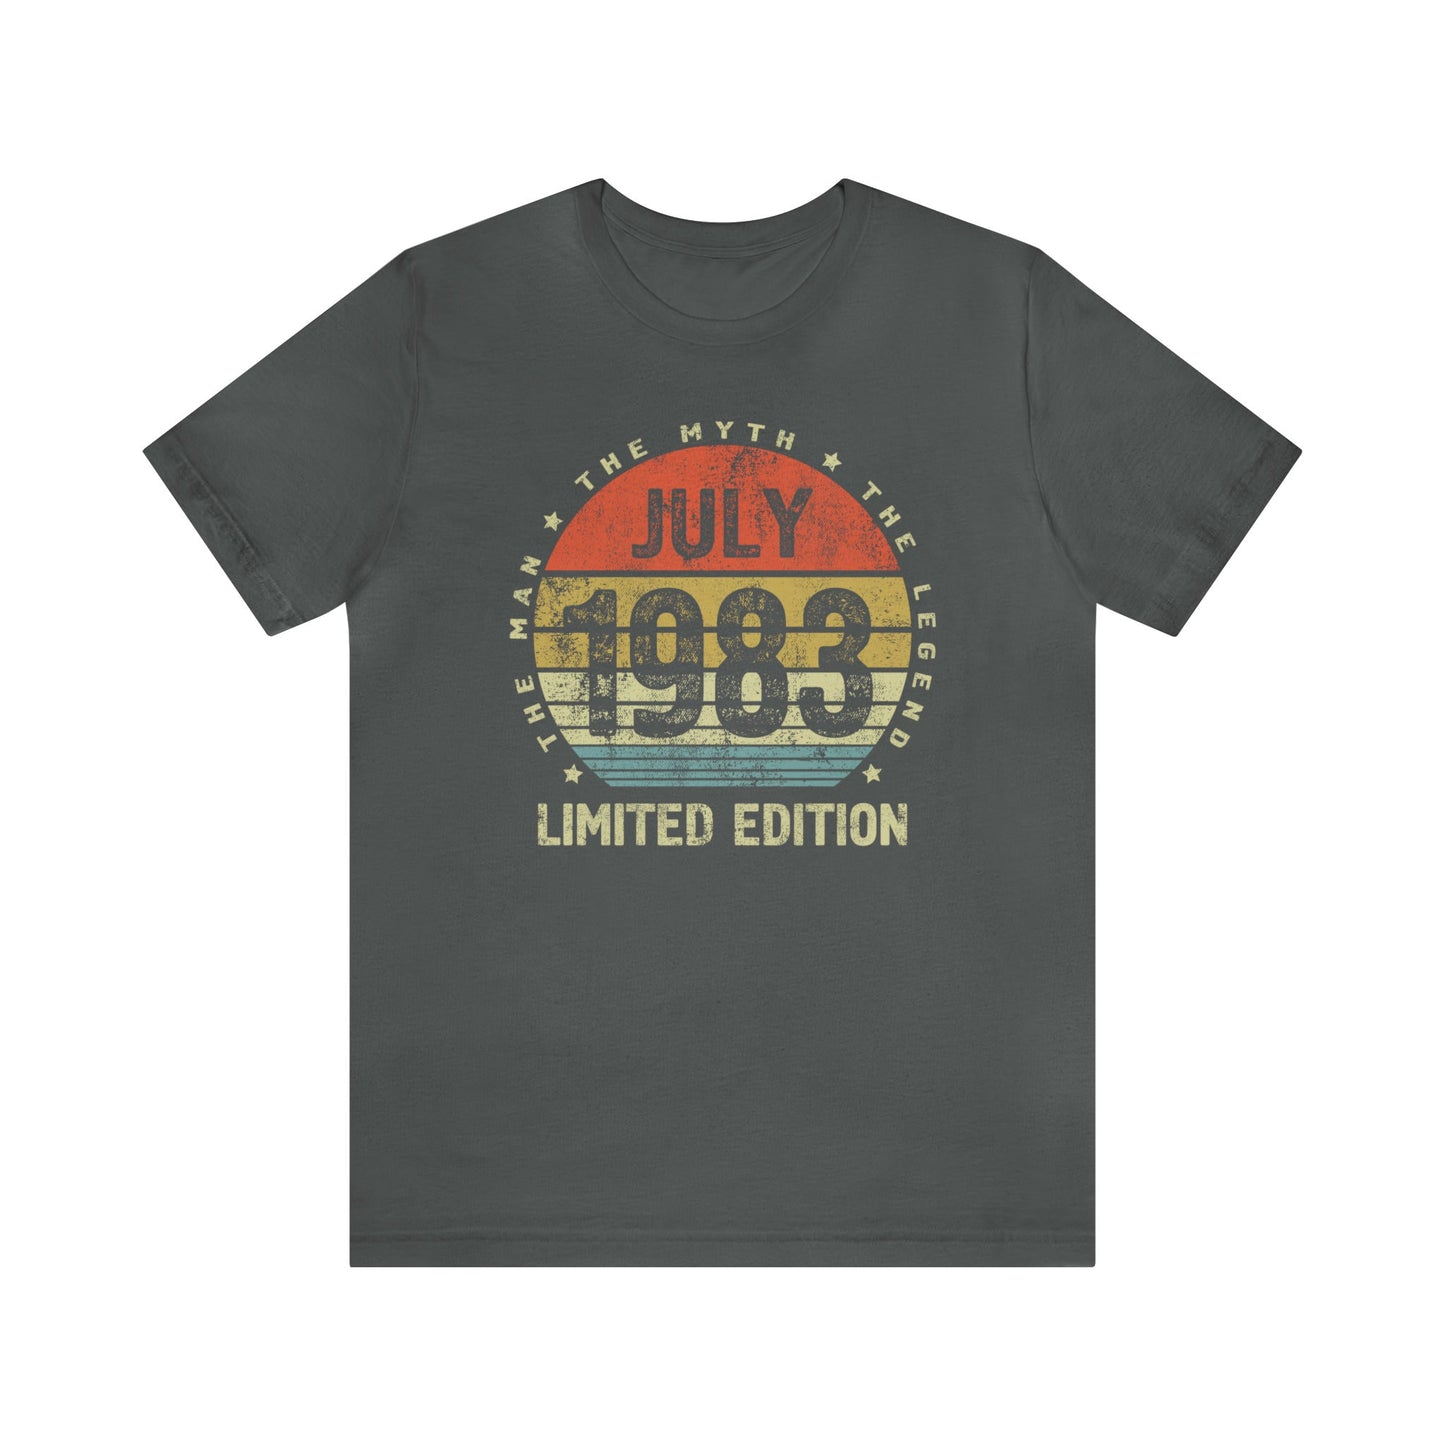 July 1983 birthday gift t-shirt for women or men, Vintage shirt for sister or brother